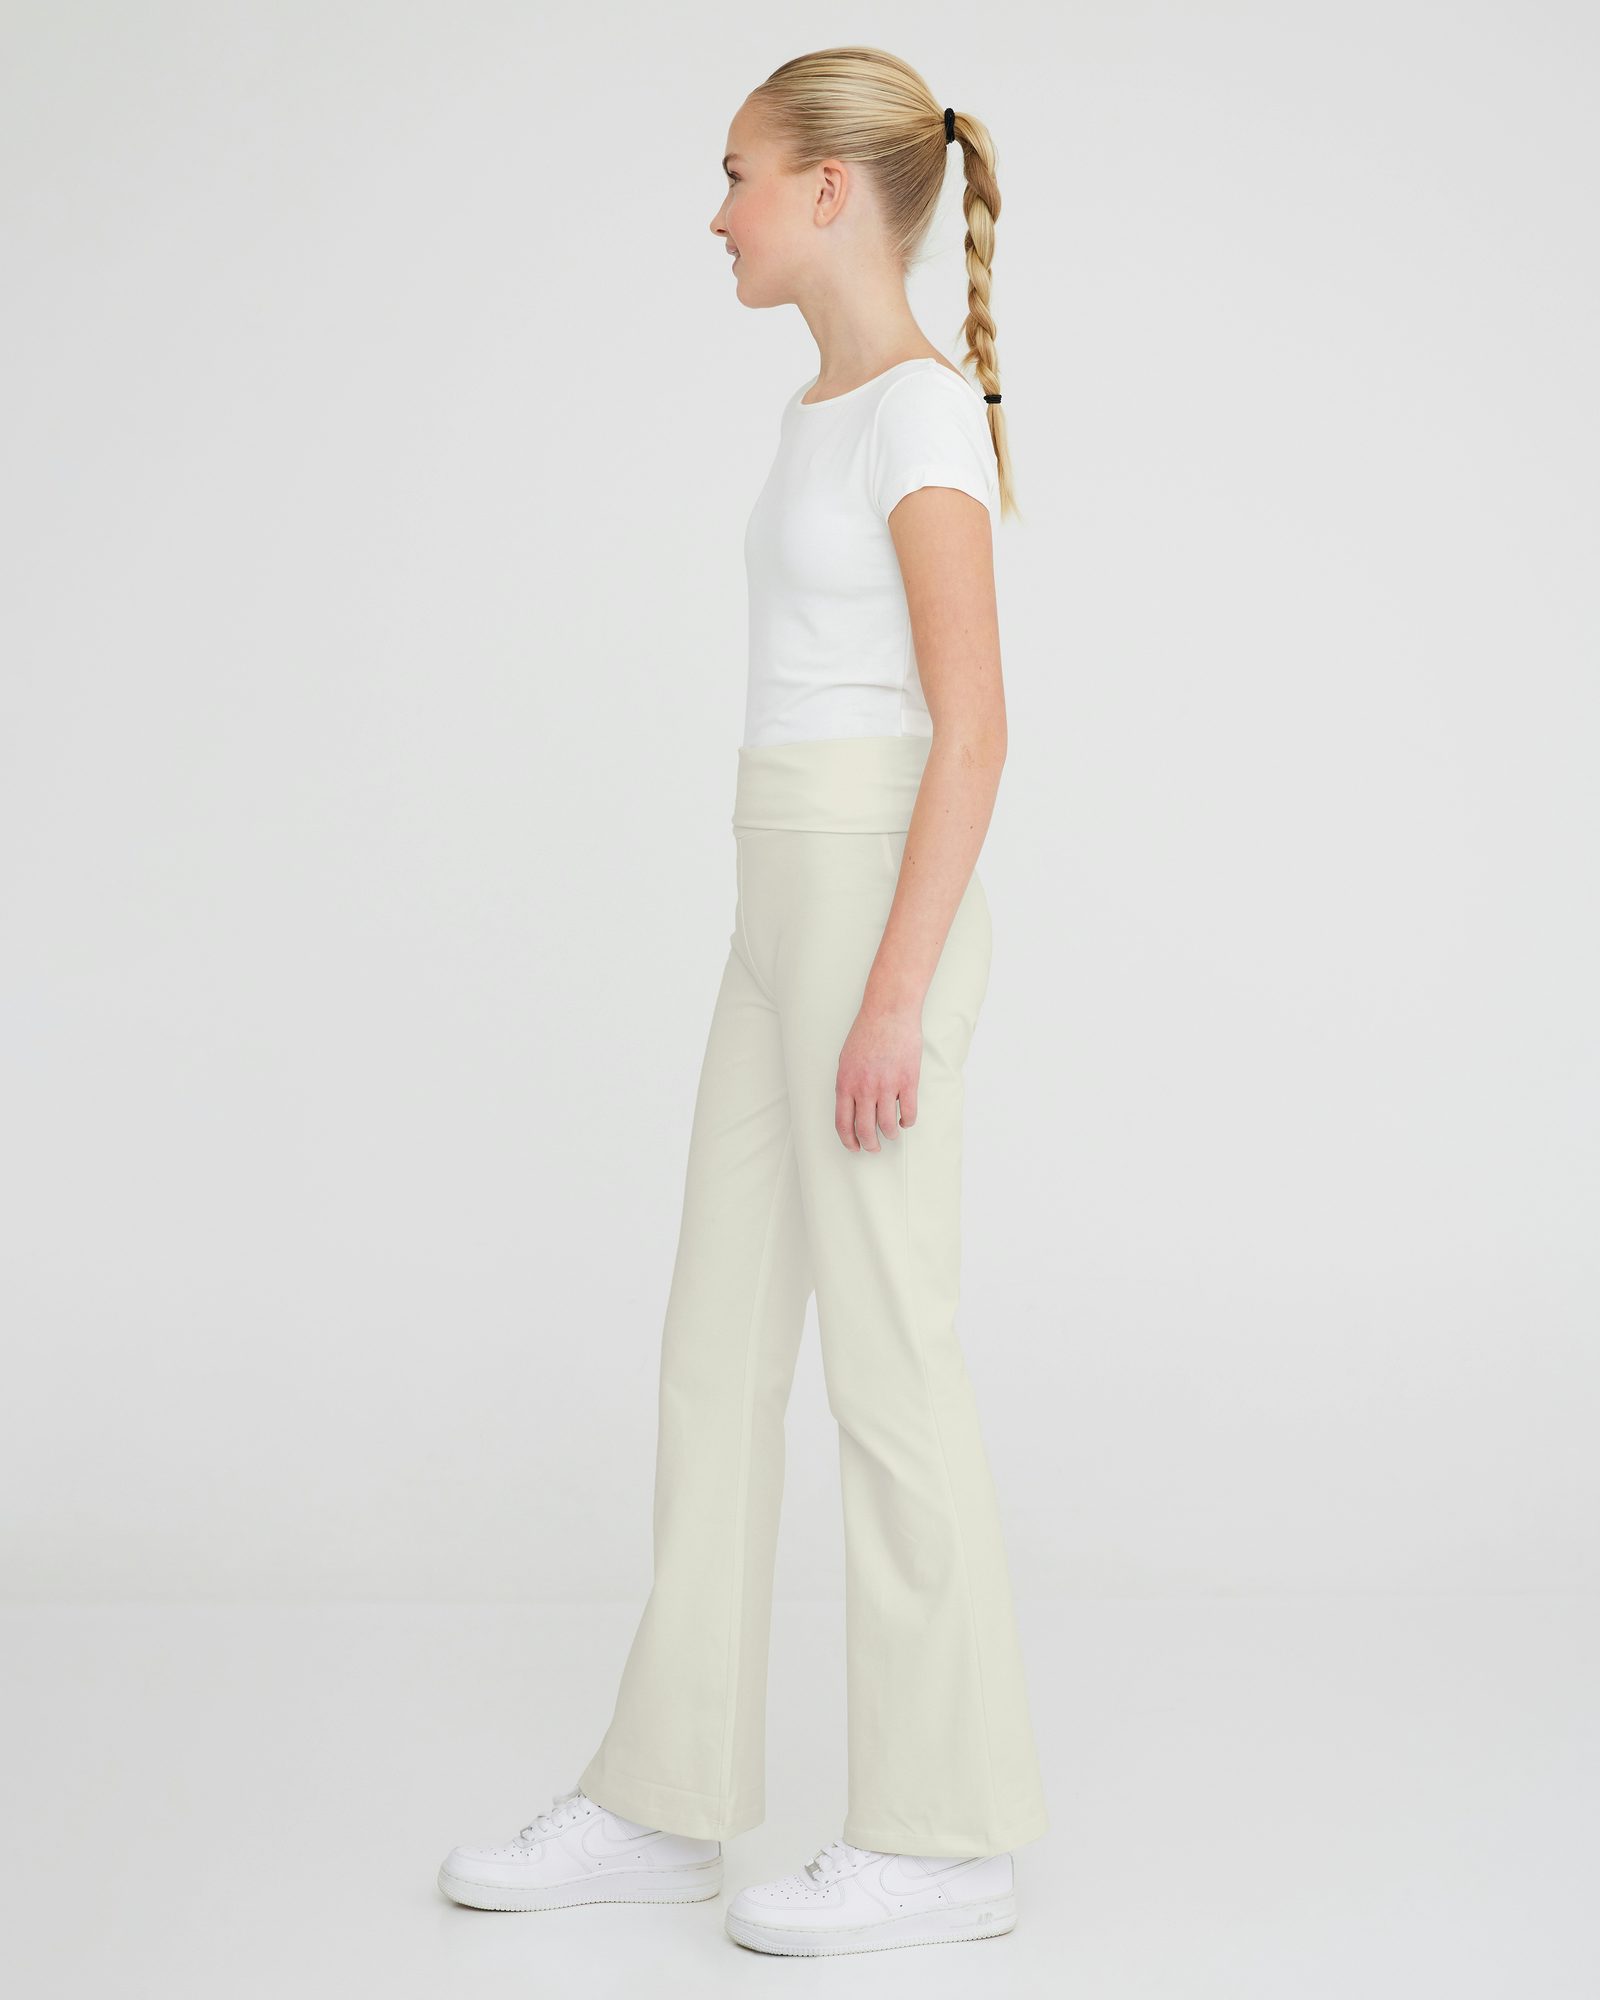 XS 70s Off-white High Waisted Pants 25 Vintage Boho Woven Wide Leg Flared  Pinup Hourglass Trousers 